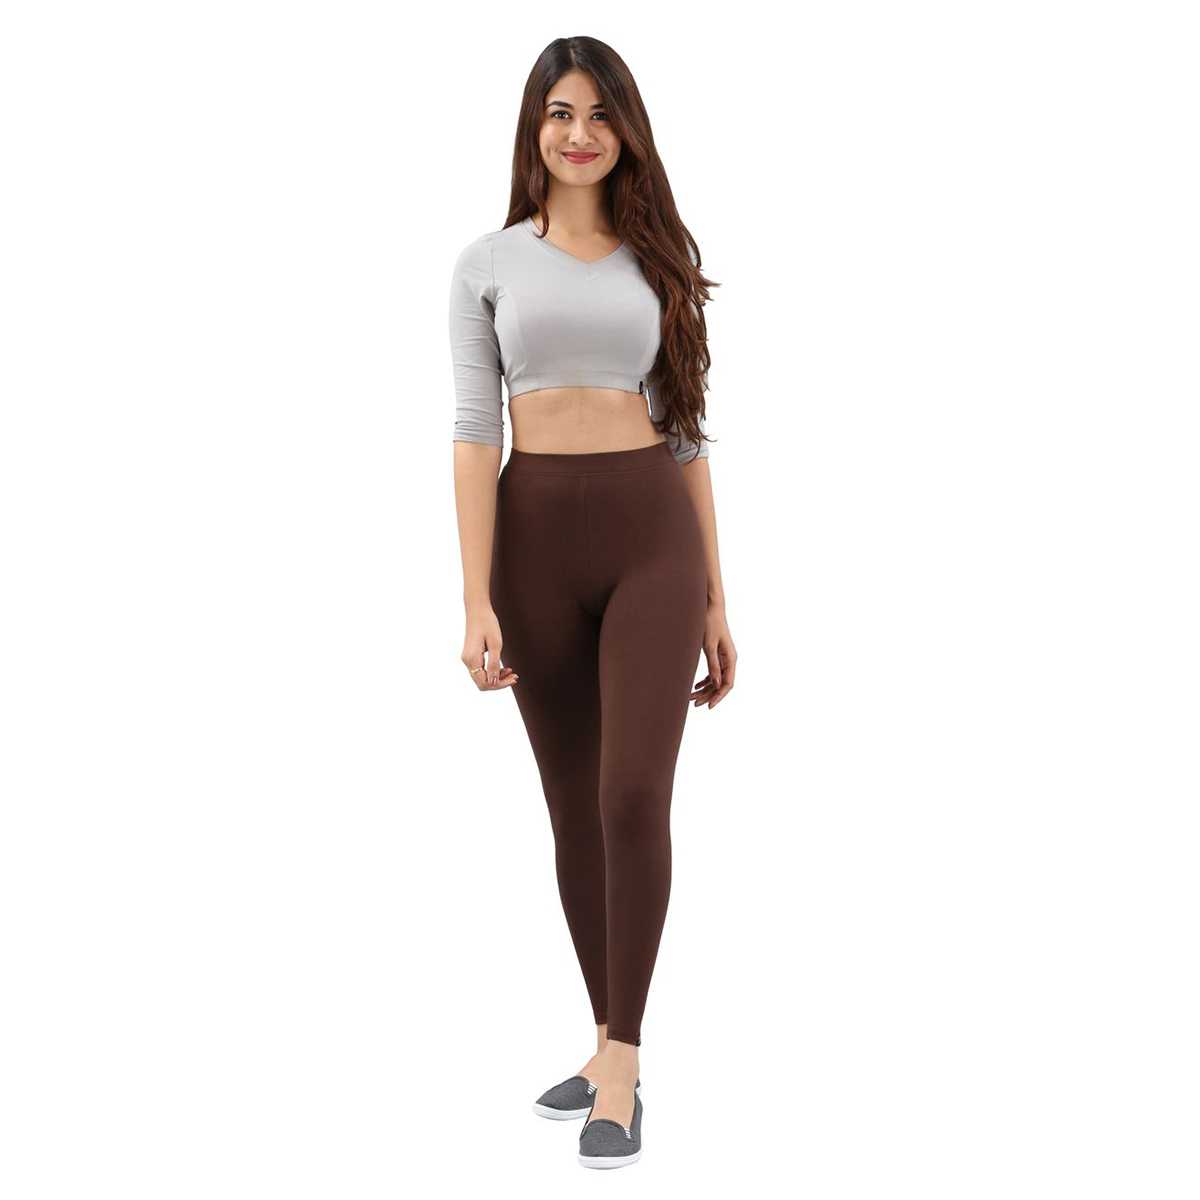 Twin Birds Women Solid Colour Viscose Ankle Length Legging with Signature Wide Waistband - Dark Chocolate